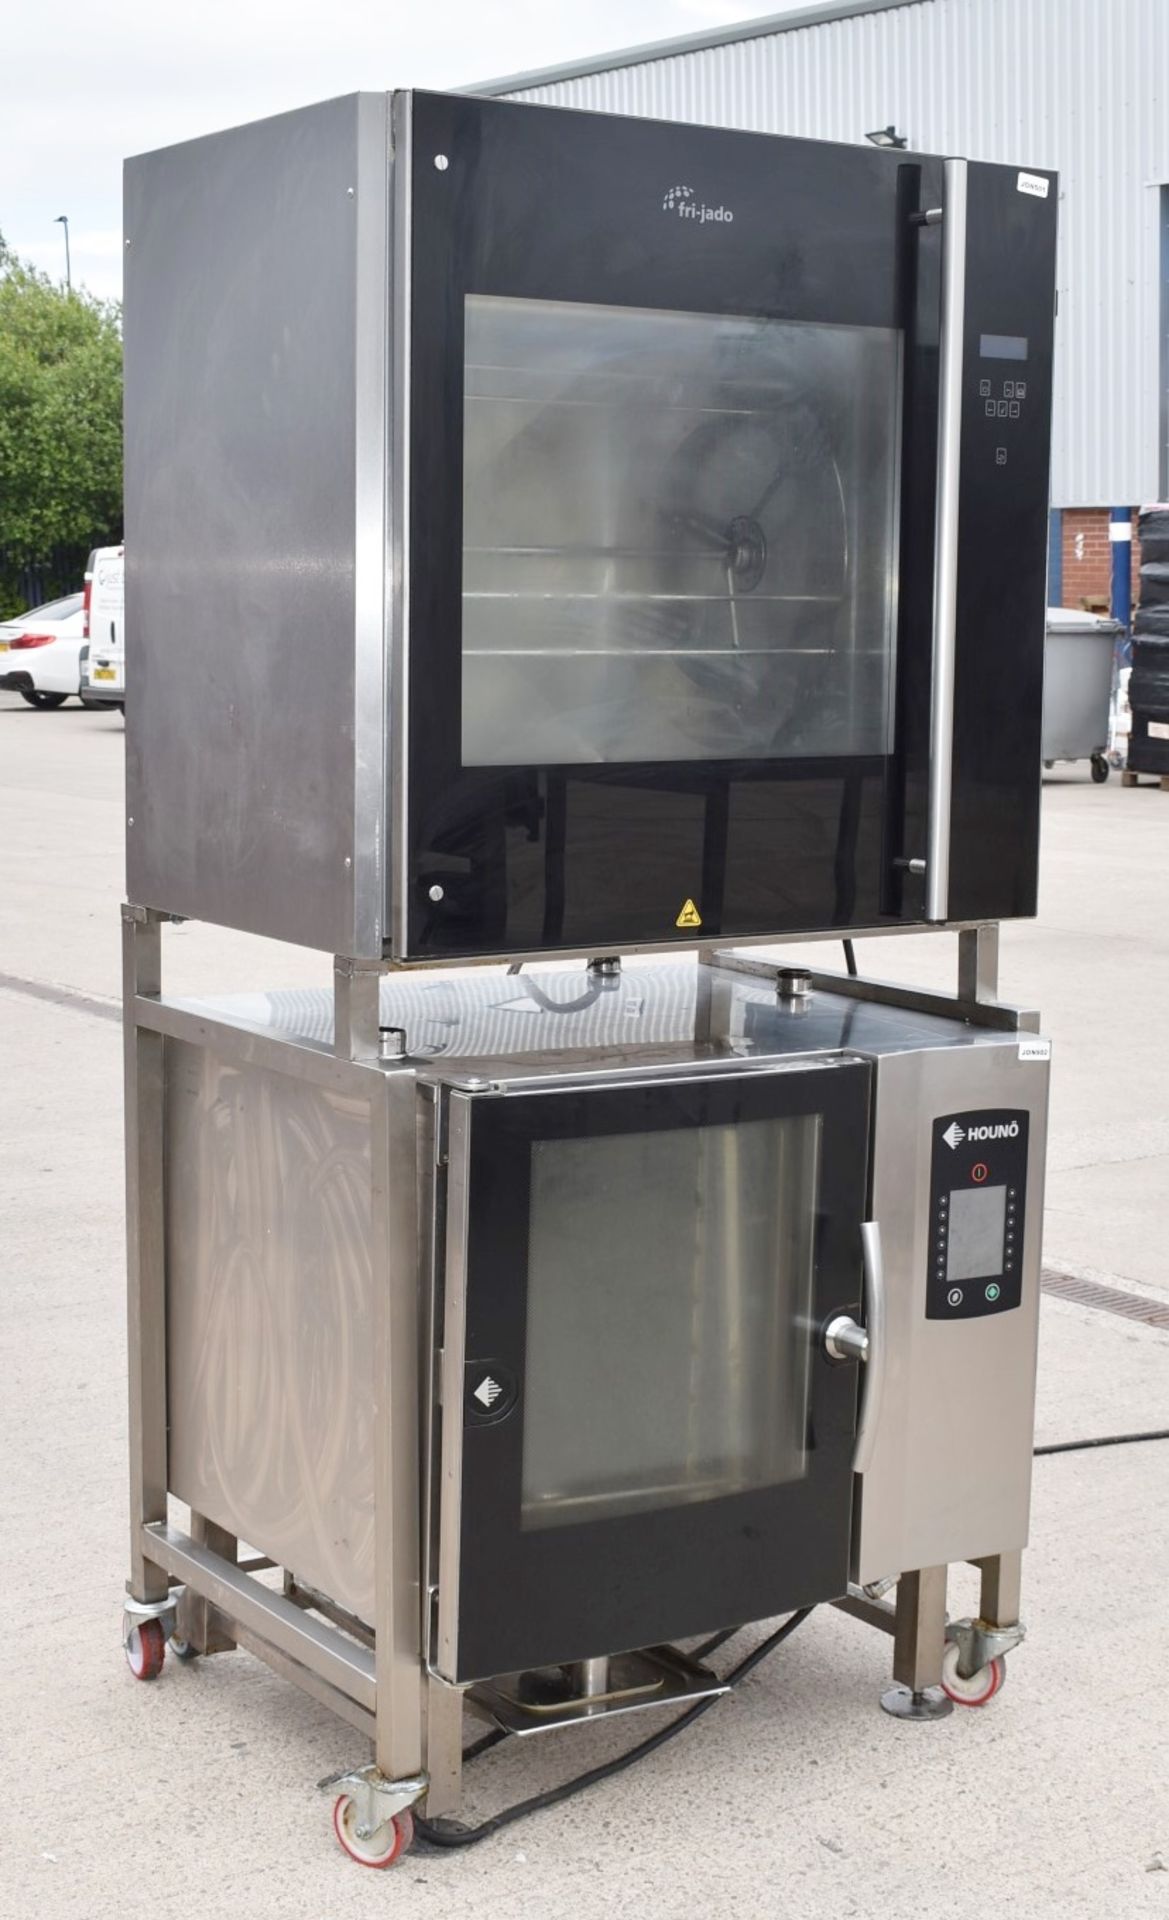 1 x Houno Electric Combi Oven and Fri-jado Rotisserie Oven Combo With Stand - 3 Phase - Image 3 of 22